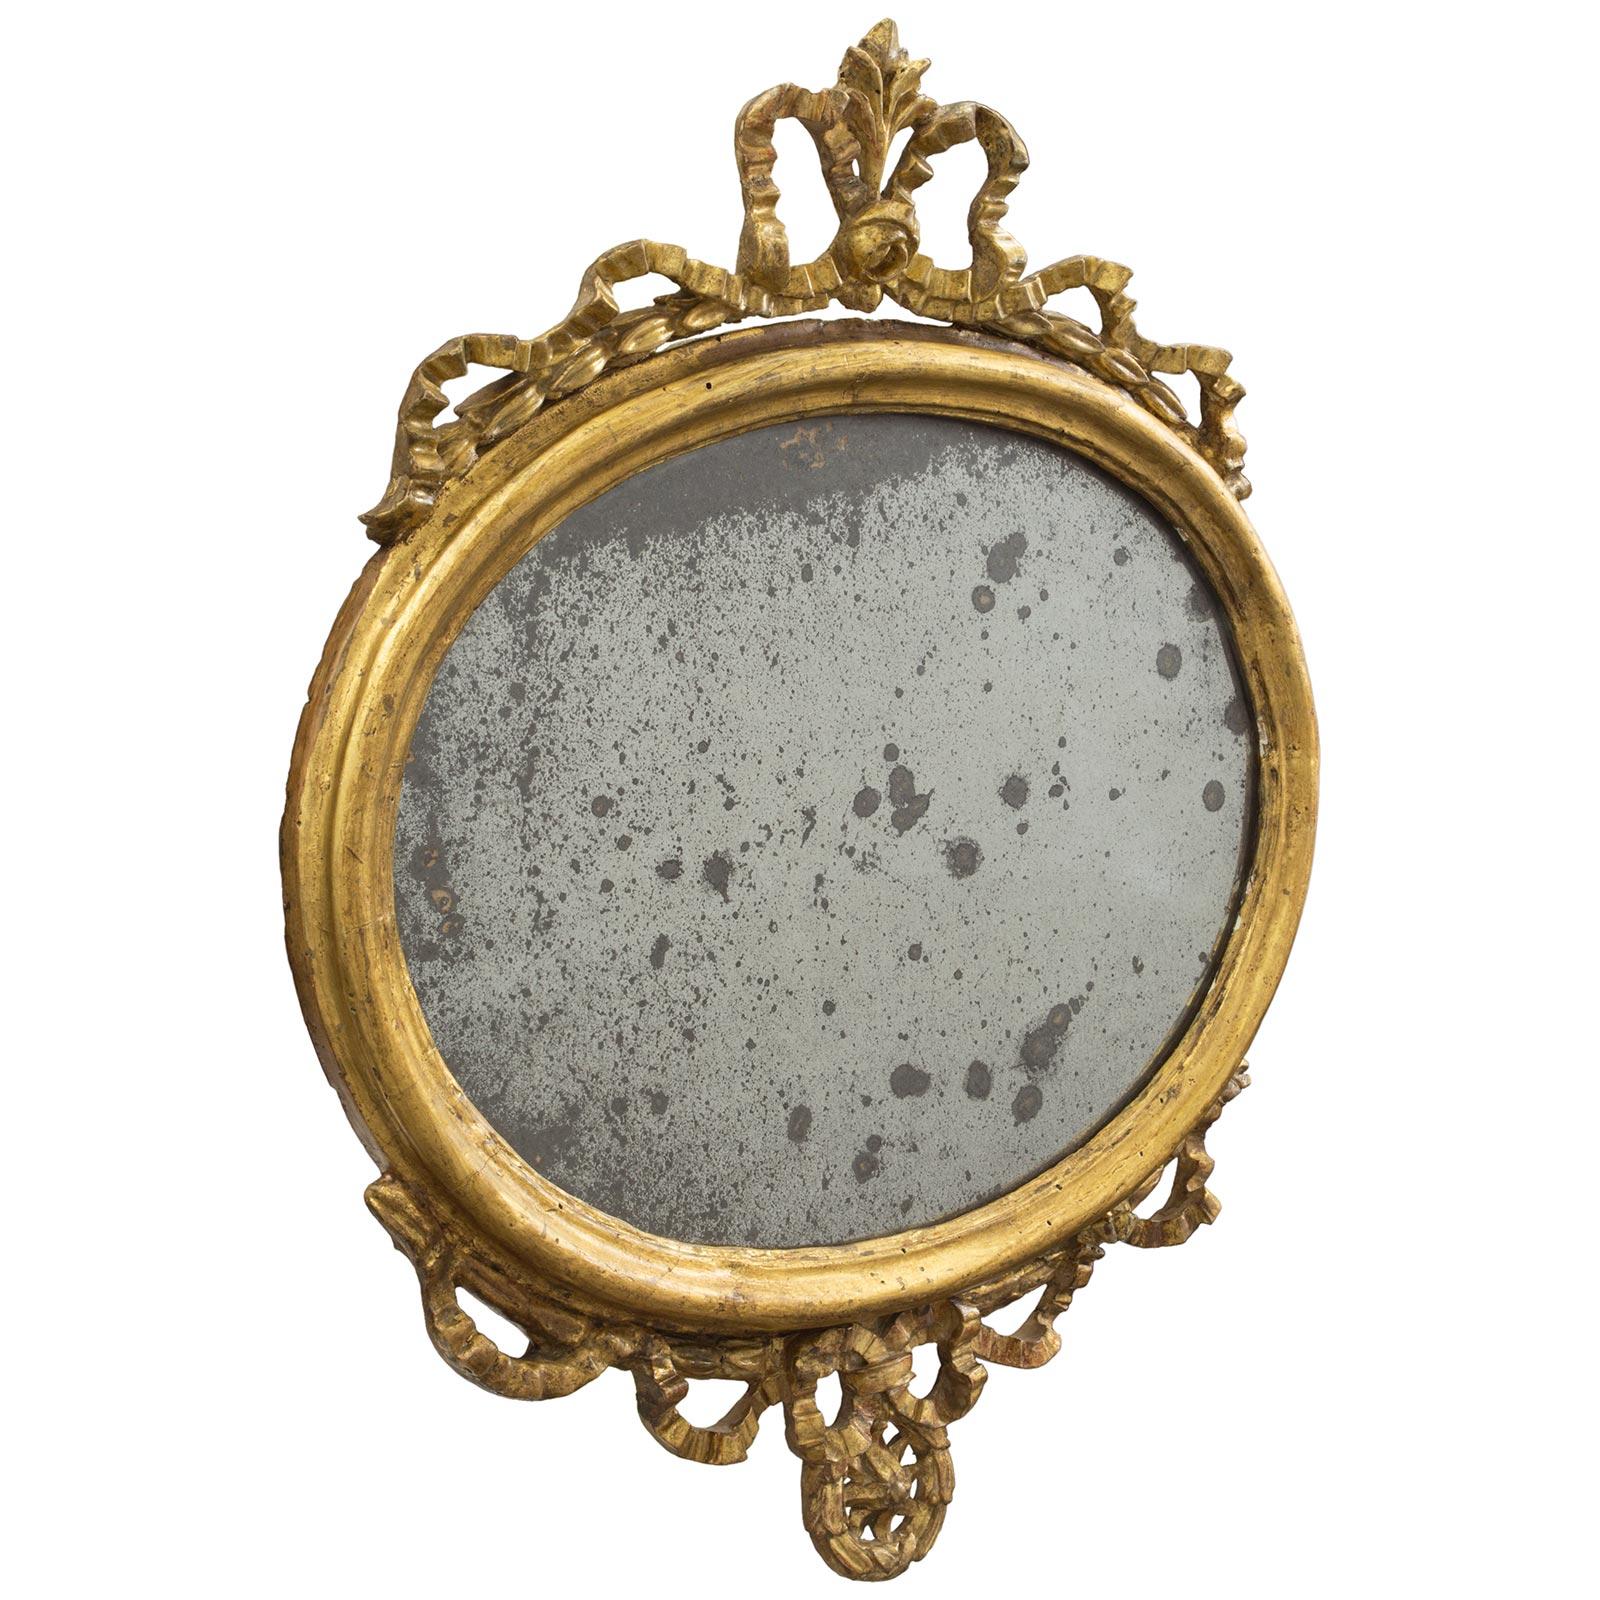 A charming pair of Italian 18th century Louis XVI period giltwood mirrors. Each mirror frame has a mottled oval frame with an elegant bottom reserve of a swaging ribbon with a central tied bow over a laurel wreath centered by a rosette. The top